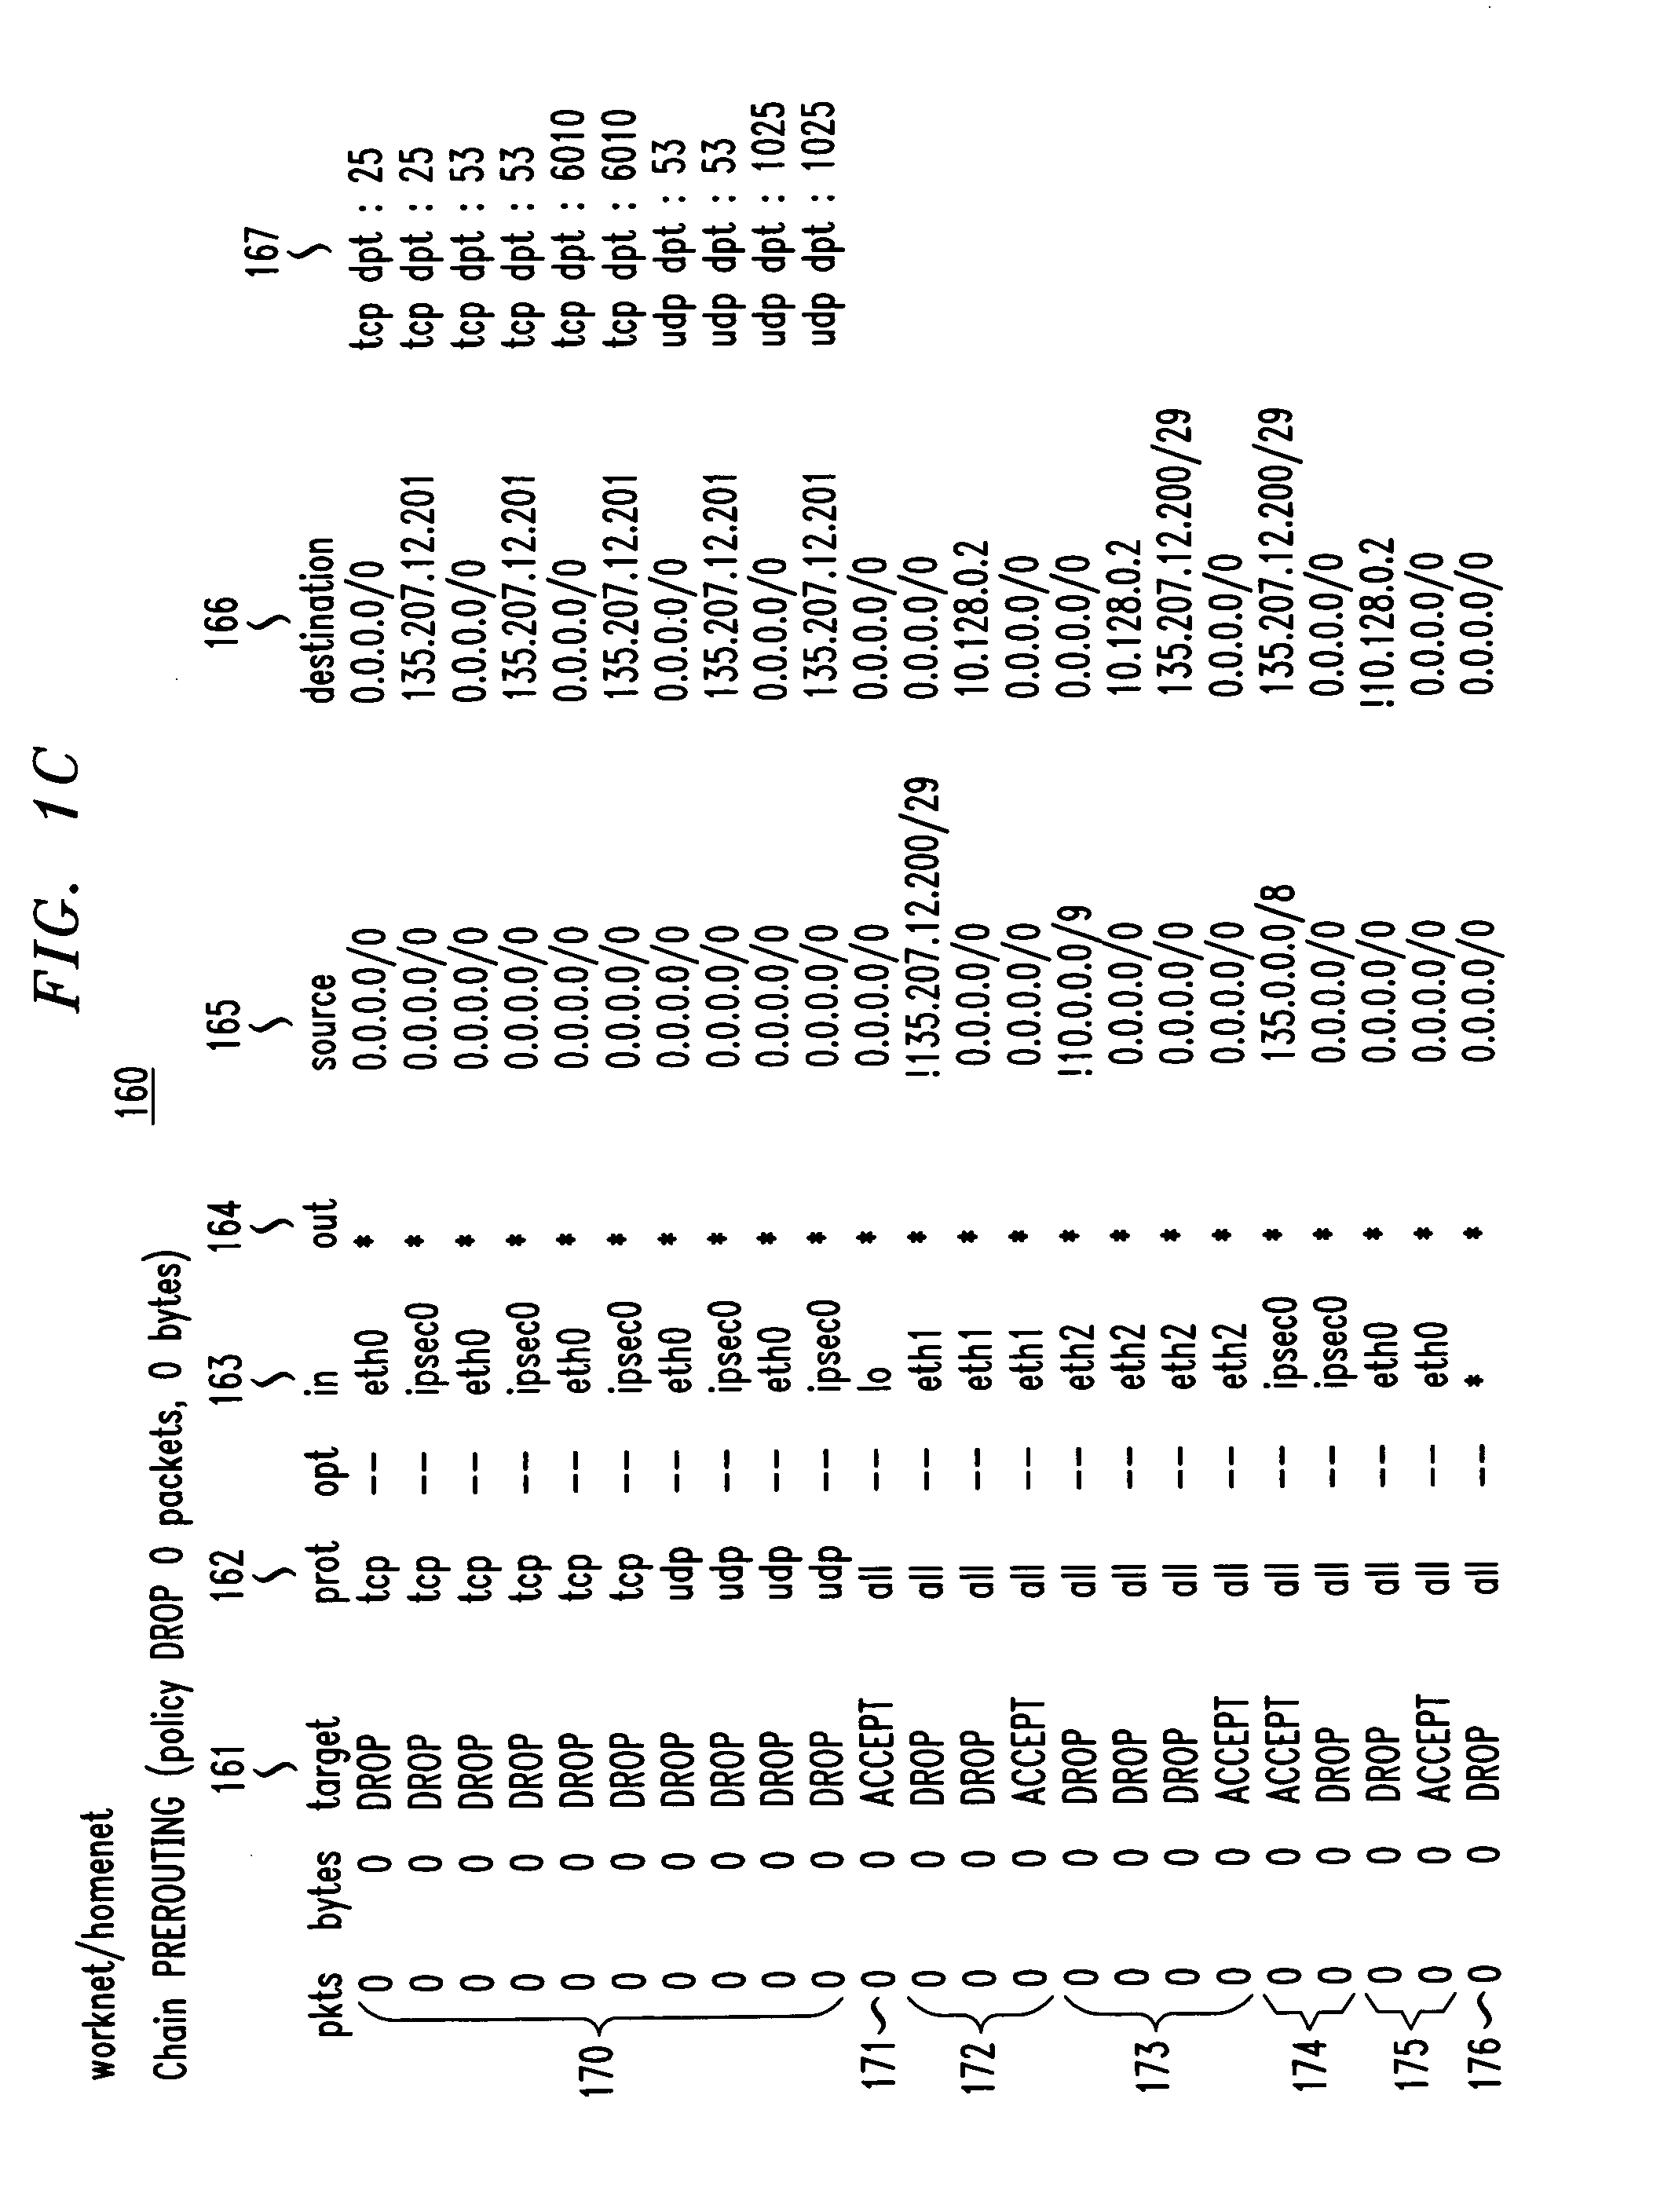 Method and apparatus for securely connecting a plurality of trust-group networks, a protected resource network and an untrusted network